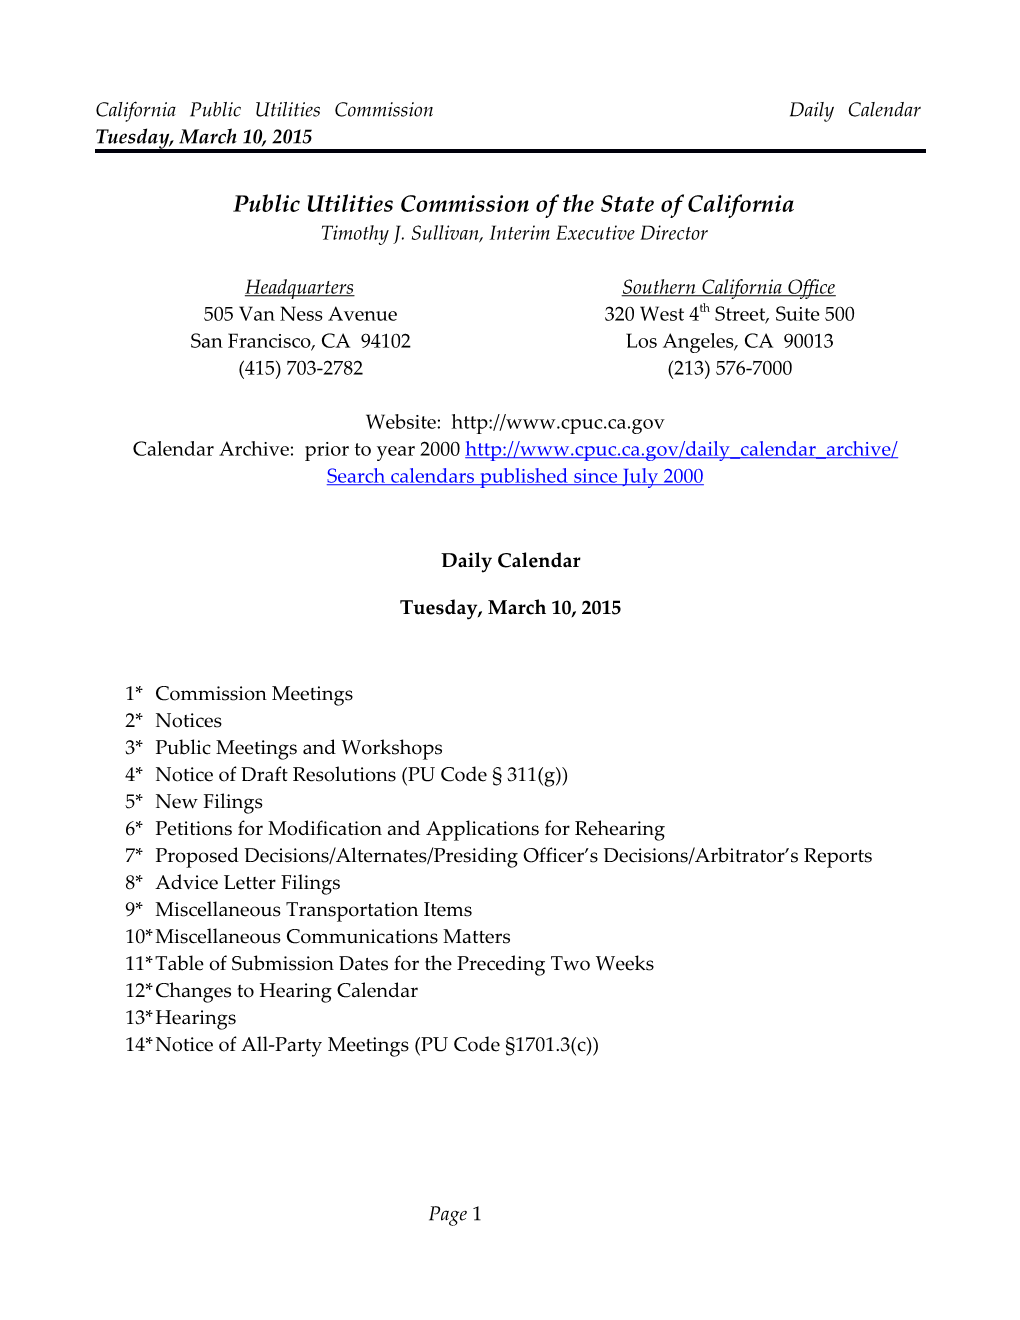 California Public Utilities Commission Daily Calendar Tuesday, March 10, 2015